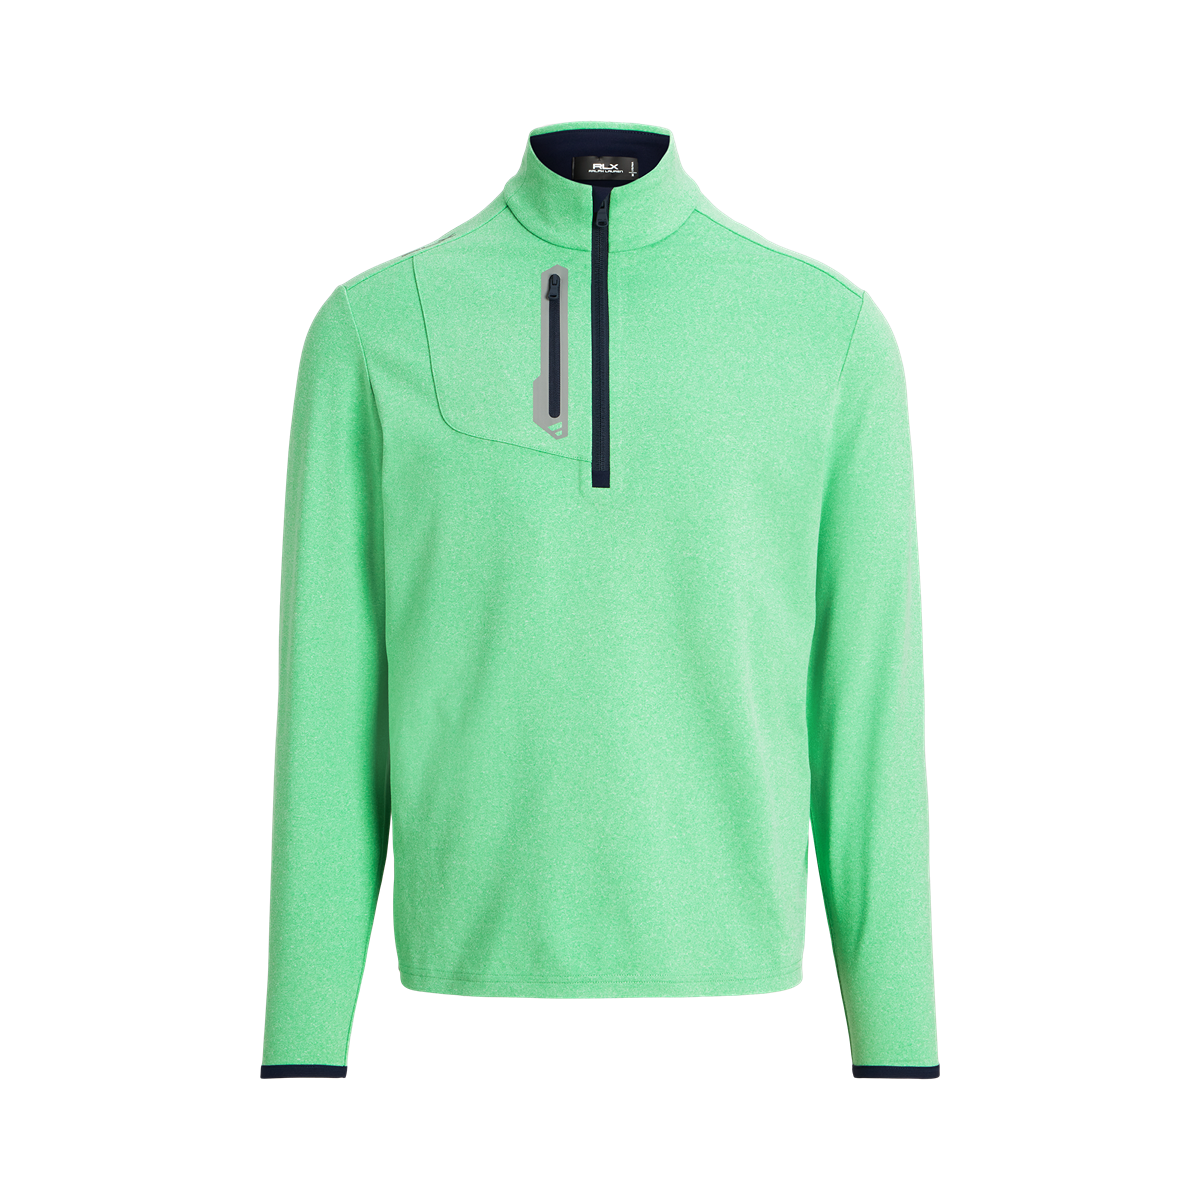 LONG-SLEEVE LUXURY PERFORMANCE JERSEY KNIT 1/4 ZIP PULLOVER Large Image